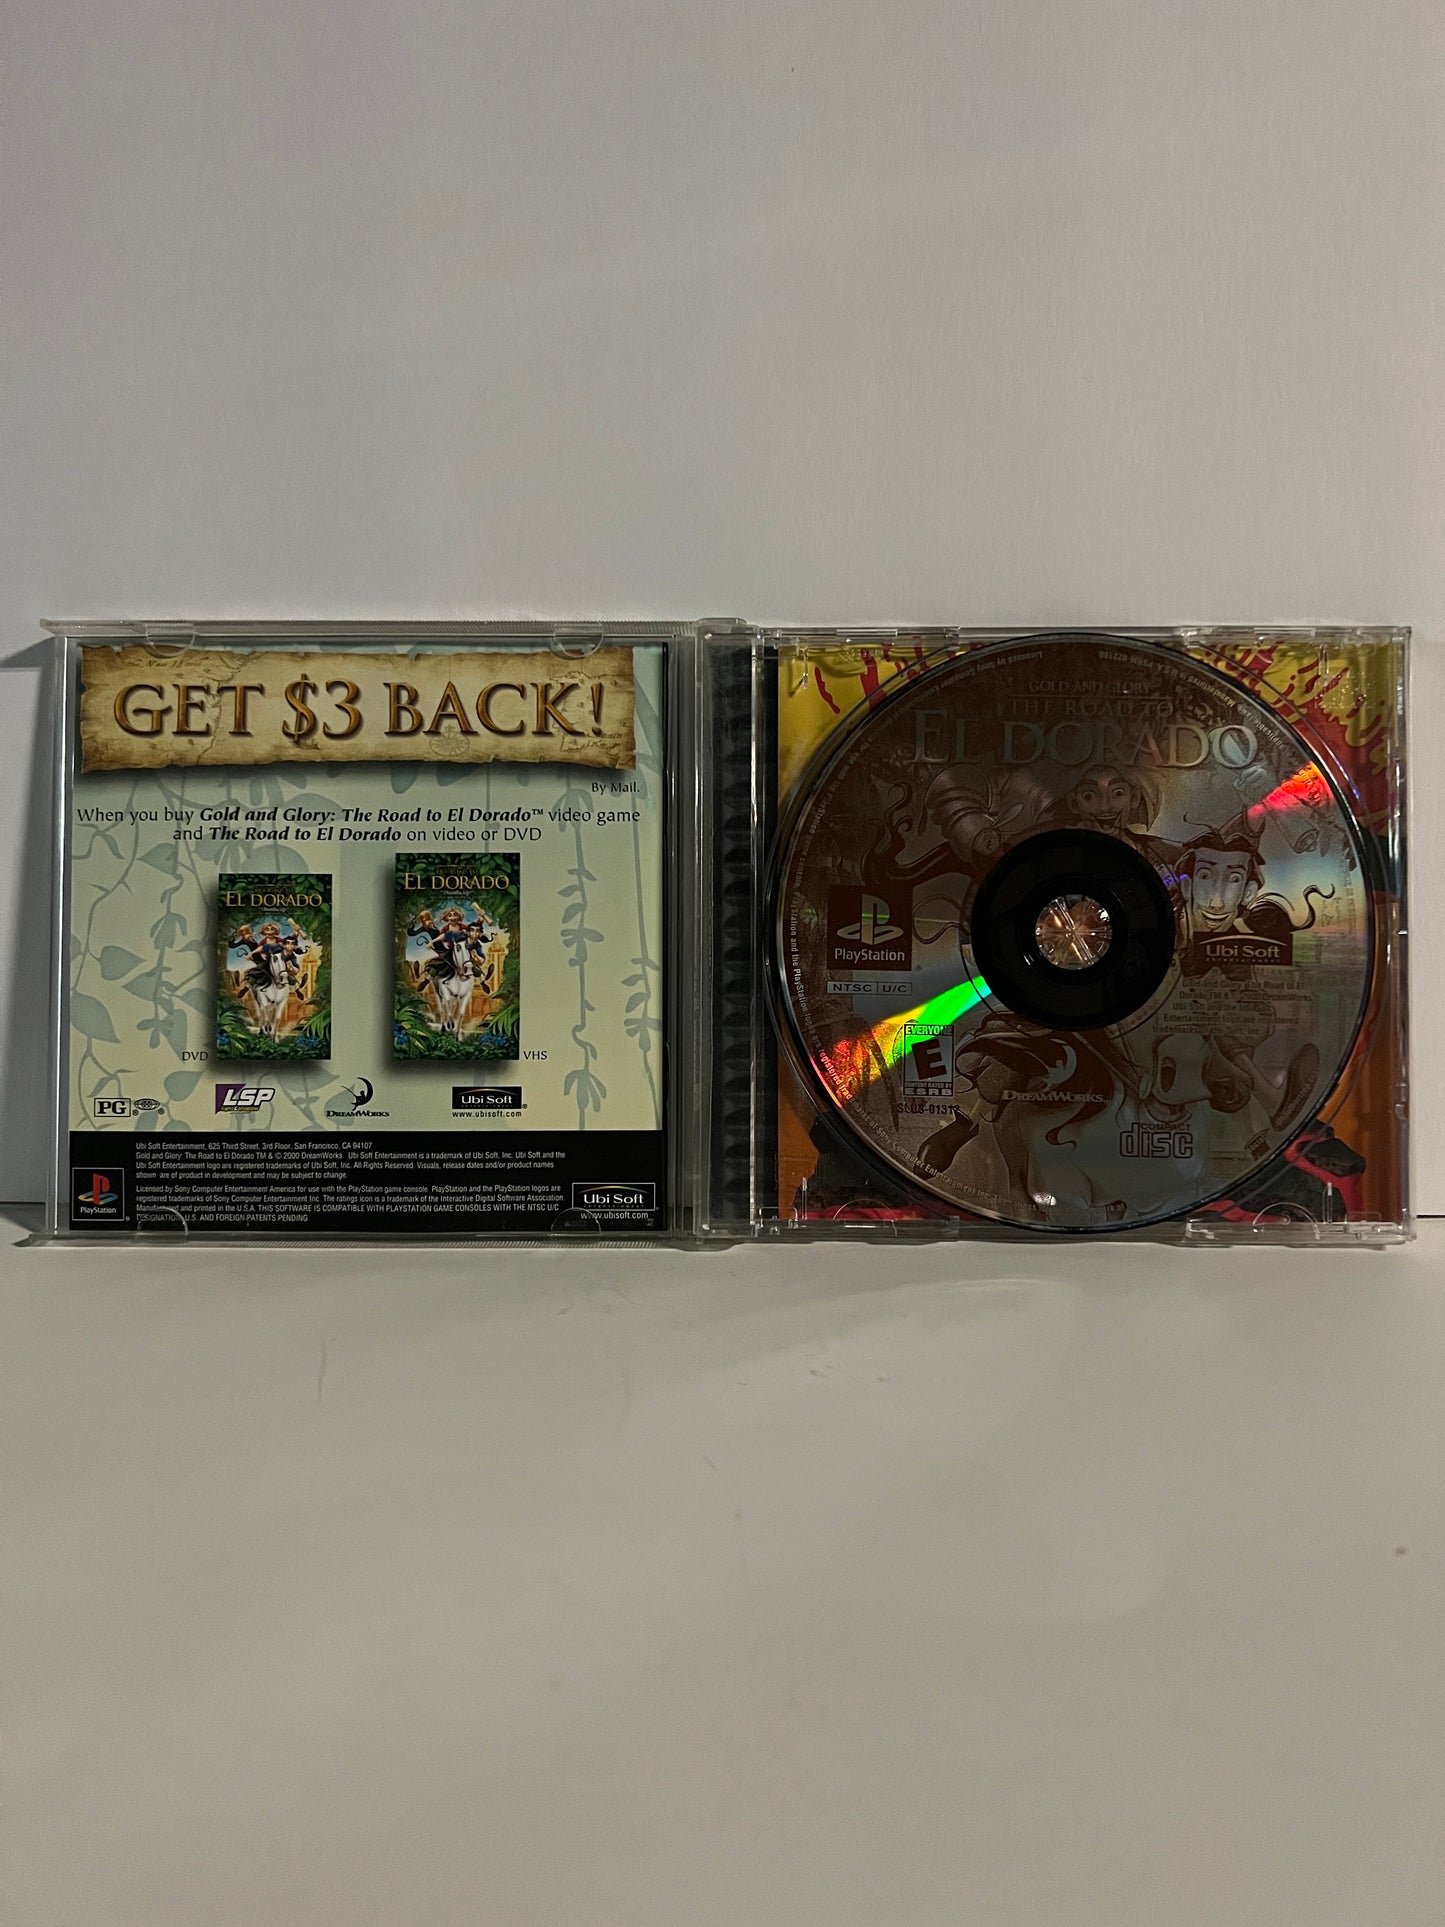 Gold and Glory, The Road to El Dorado - PS1 Game - Used